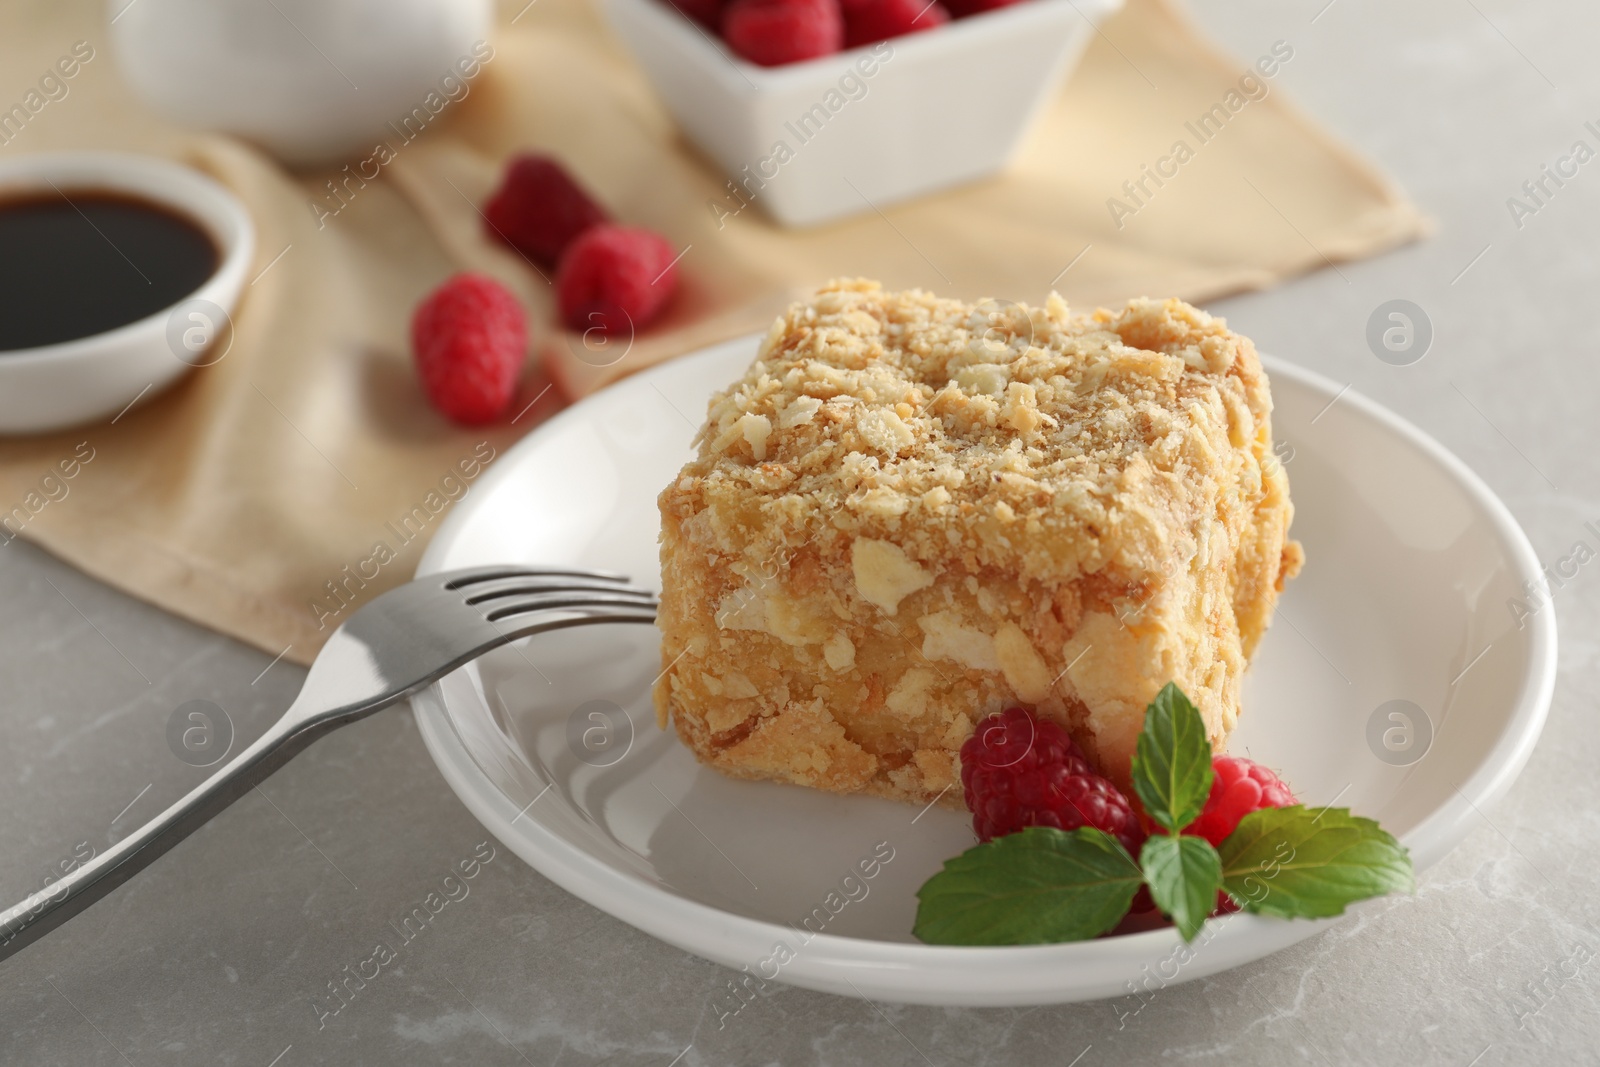 Photo of Piece of delicious Napoleon cake, raspberries and fork on beige table, closeup